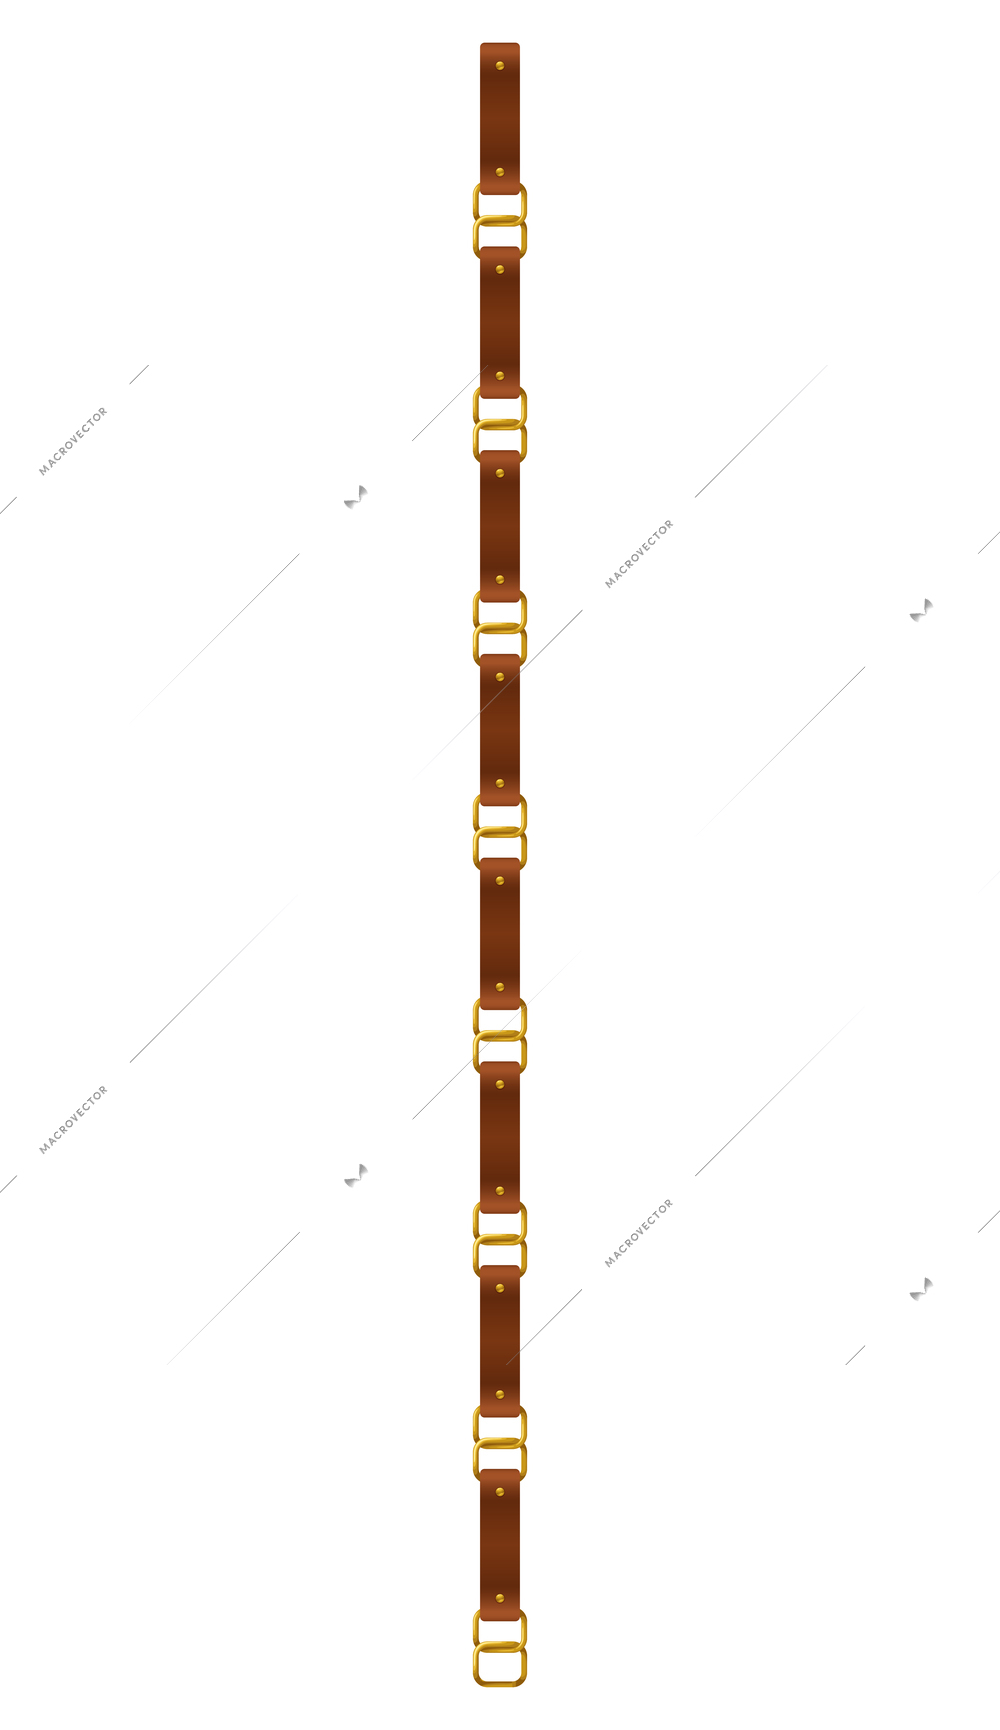 Realistic leather belt with golden chain links on white background vector illustration